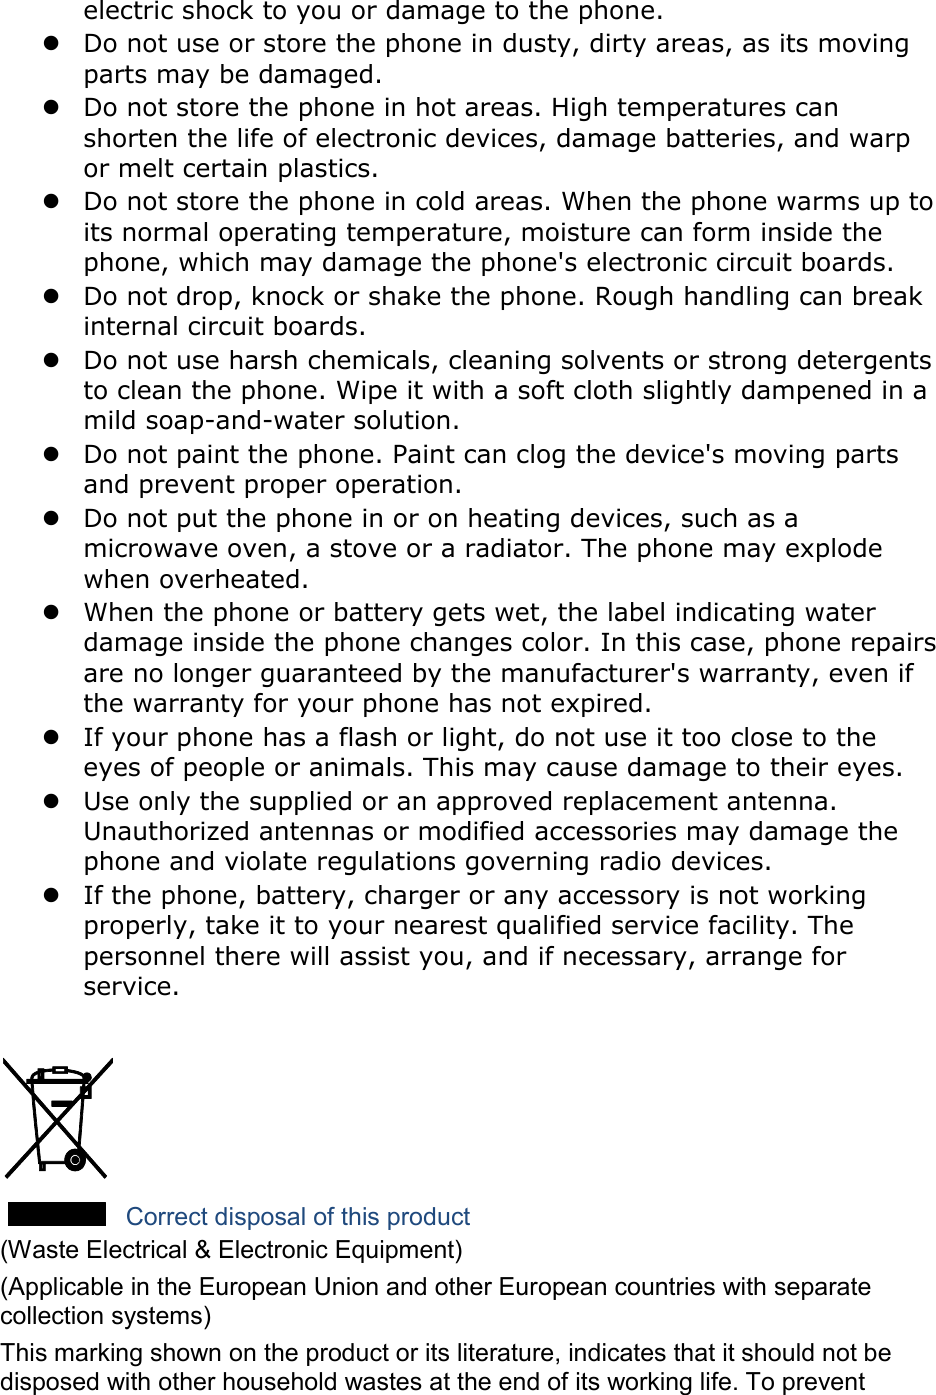 electric shock to you or damage to the phone.  Do not use or store the phone in dusty, dirty areas, as its moving parts may be damaged.  Do not store the phone in hot areas. High temperatures can shorten the life of electronic devices, damage batteries, and warp or melt certain plastics.  Do not store the phone in cold areas. When the phone warms up to its normal operating temperature, moisture can form inside the phone, which may damage the phone&apos;s electronic circuit boards.  Do not drop, knock or shake the phone. Rough handling can break internal circuit boards.  Do not use harsh chemicals, cleaning solvents or strong detergents to clean the phone. Wipe it with a soft cloth slightly dampened in a mild soap-and-water solution.  Do not paint the phone. Paint can clog the device&apos;s moving parts and prevent proper operation.  Do not put the phone in or on heating devices, such as a microwave oven, a stove or a radiator. The phone may explode when overheated.  When the phone or battery gets wet, the label indicating water damage inside the phone changes color. In this case, phone repairs are no longer guaranteed by the manufacturer&apos;s warranty, even if the warranty for your phone has not expired.    If your phone has a flash or light, do not use it too close to the eyes of people or animals. This may cause damage to their eyes.  Use only the supplied or an approved replacement antenna. Unauthorized antennas or modified accessories may damage the phone and violate regulations governing radio devices.  If the phone, battery, charger or any accessory is not working properly, take it to your nearest qualified service facility. The personnel there will assist you, and if necessary, arrange for service.   Correct disposal of this product (Waste Electrical &amp; Electronic Equipment) (Applicable in the European Union and other European countries with separate collection systems) This marking shown on the product or its literature, indicates that it should not be disposed with other household wastes at the end of its working life. To prevent 